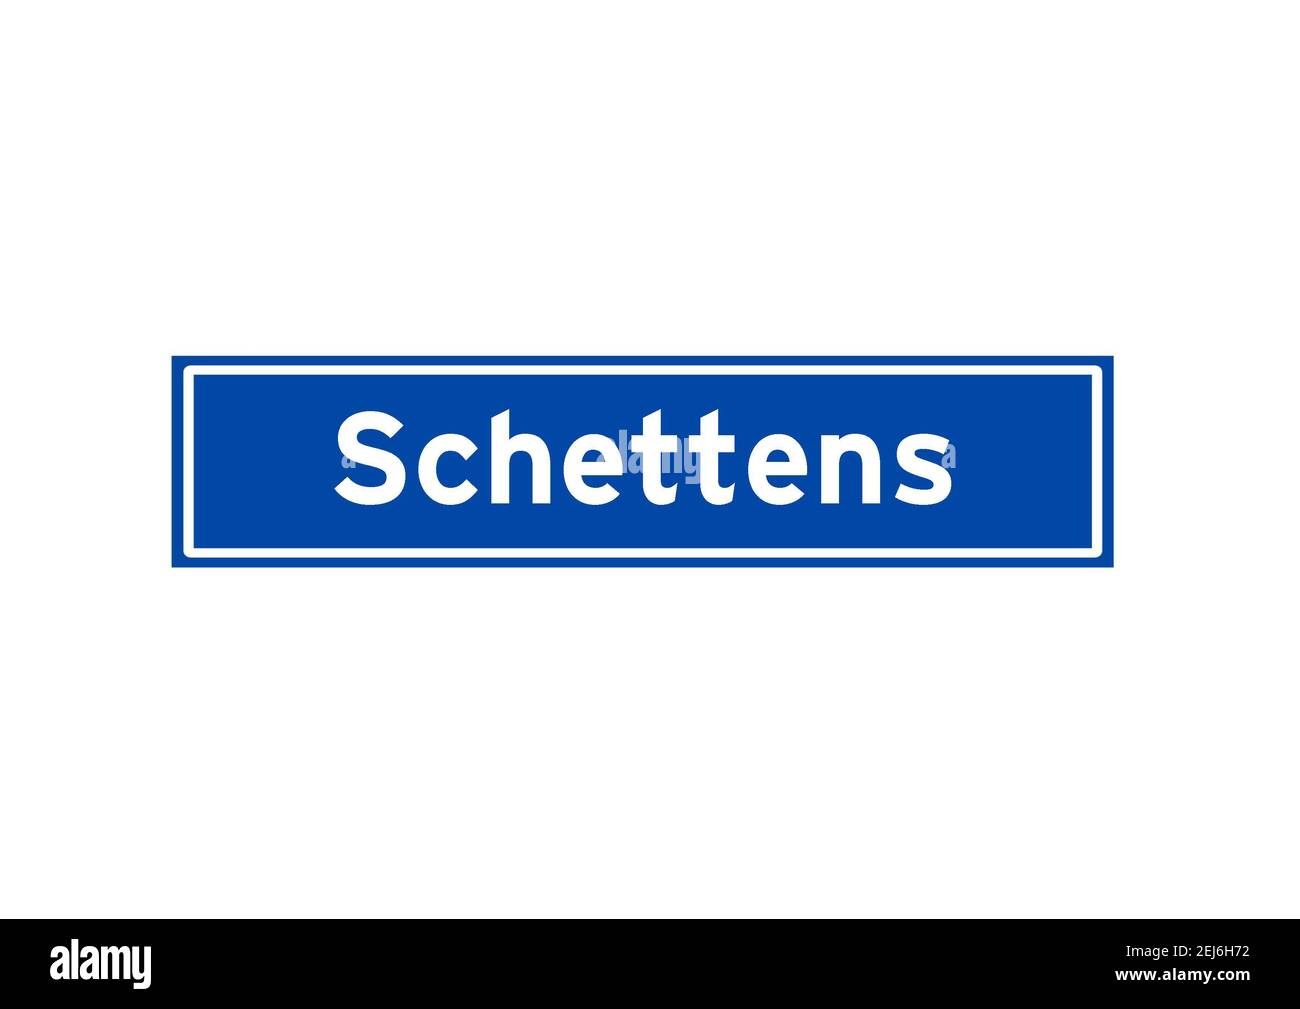 Schettens isolated Dutch place name sign. City sign from the Netherlands. Stock Photo